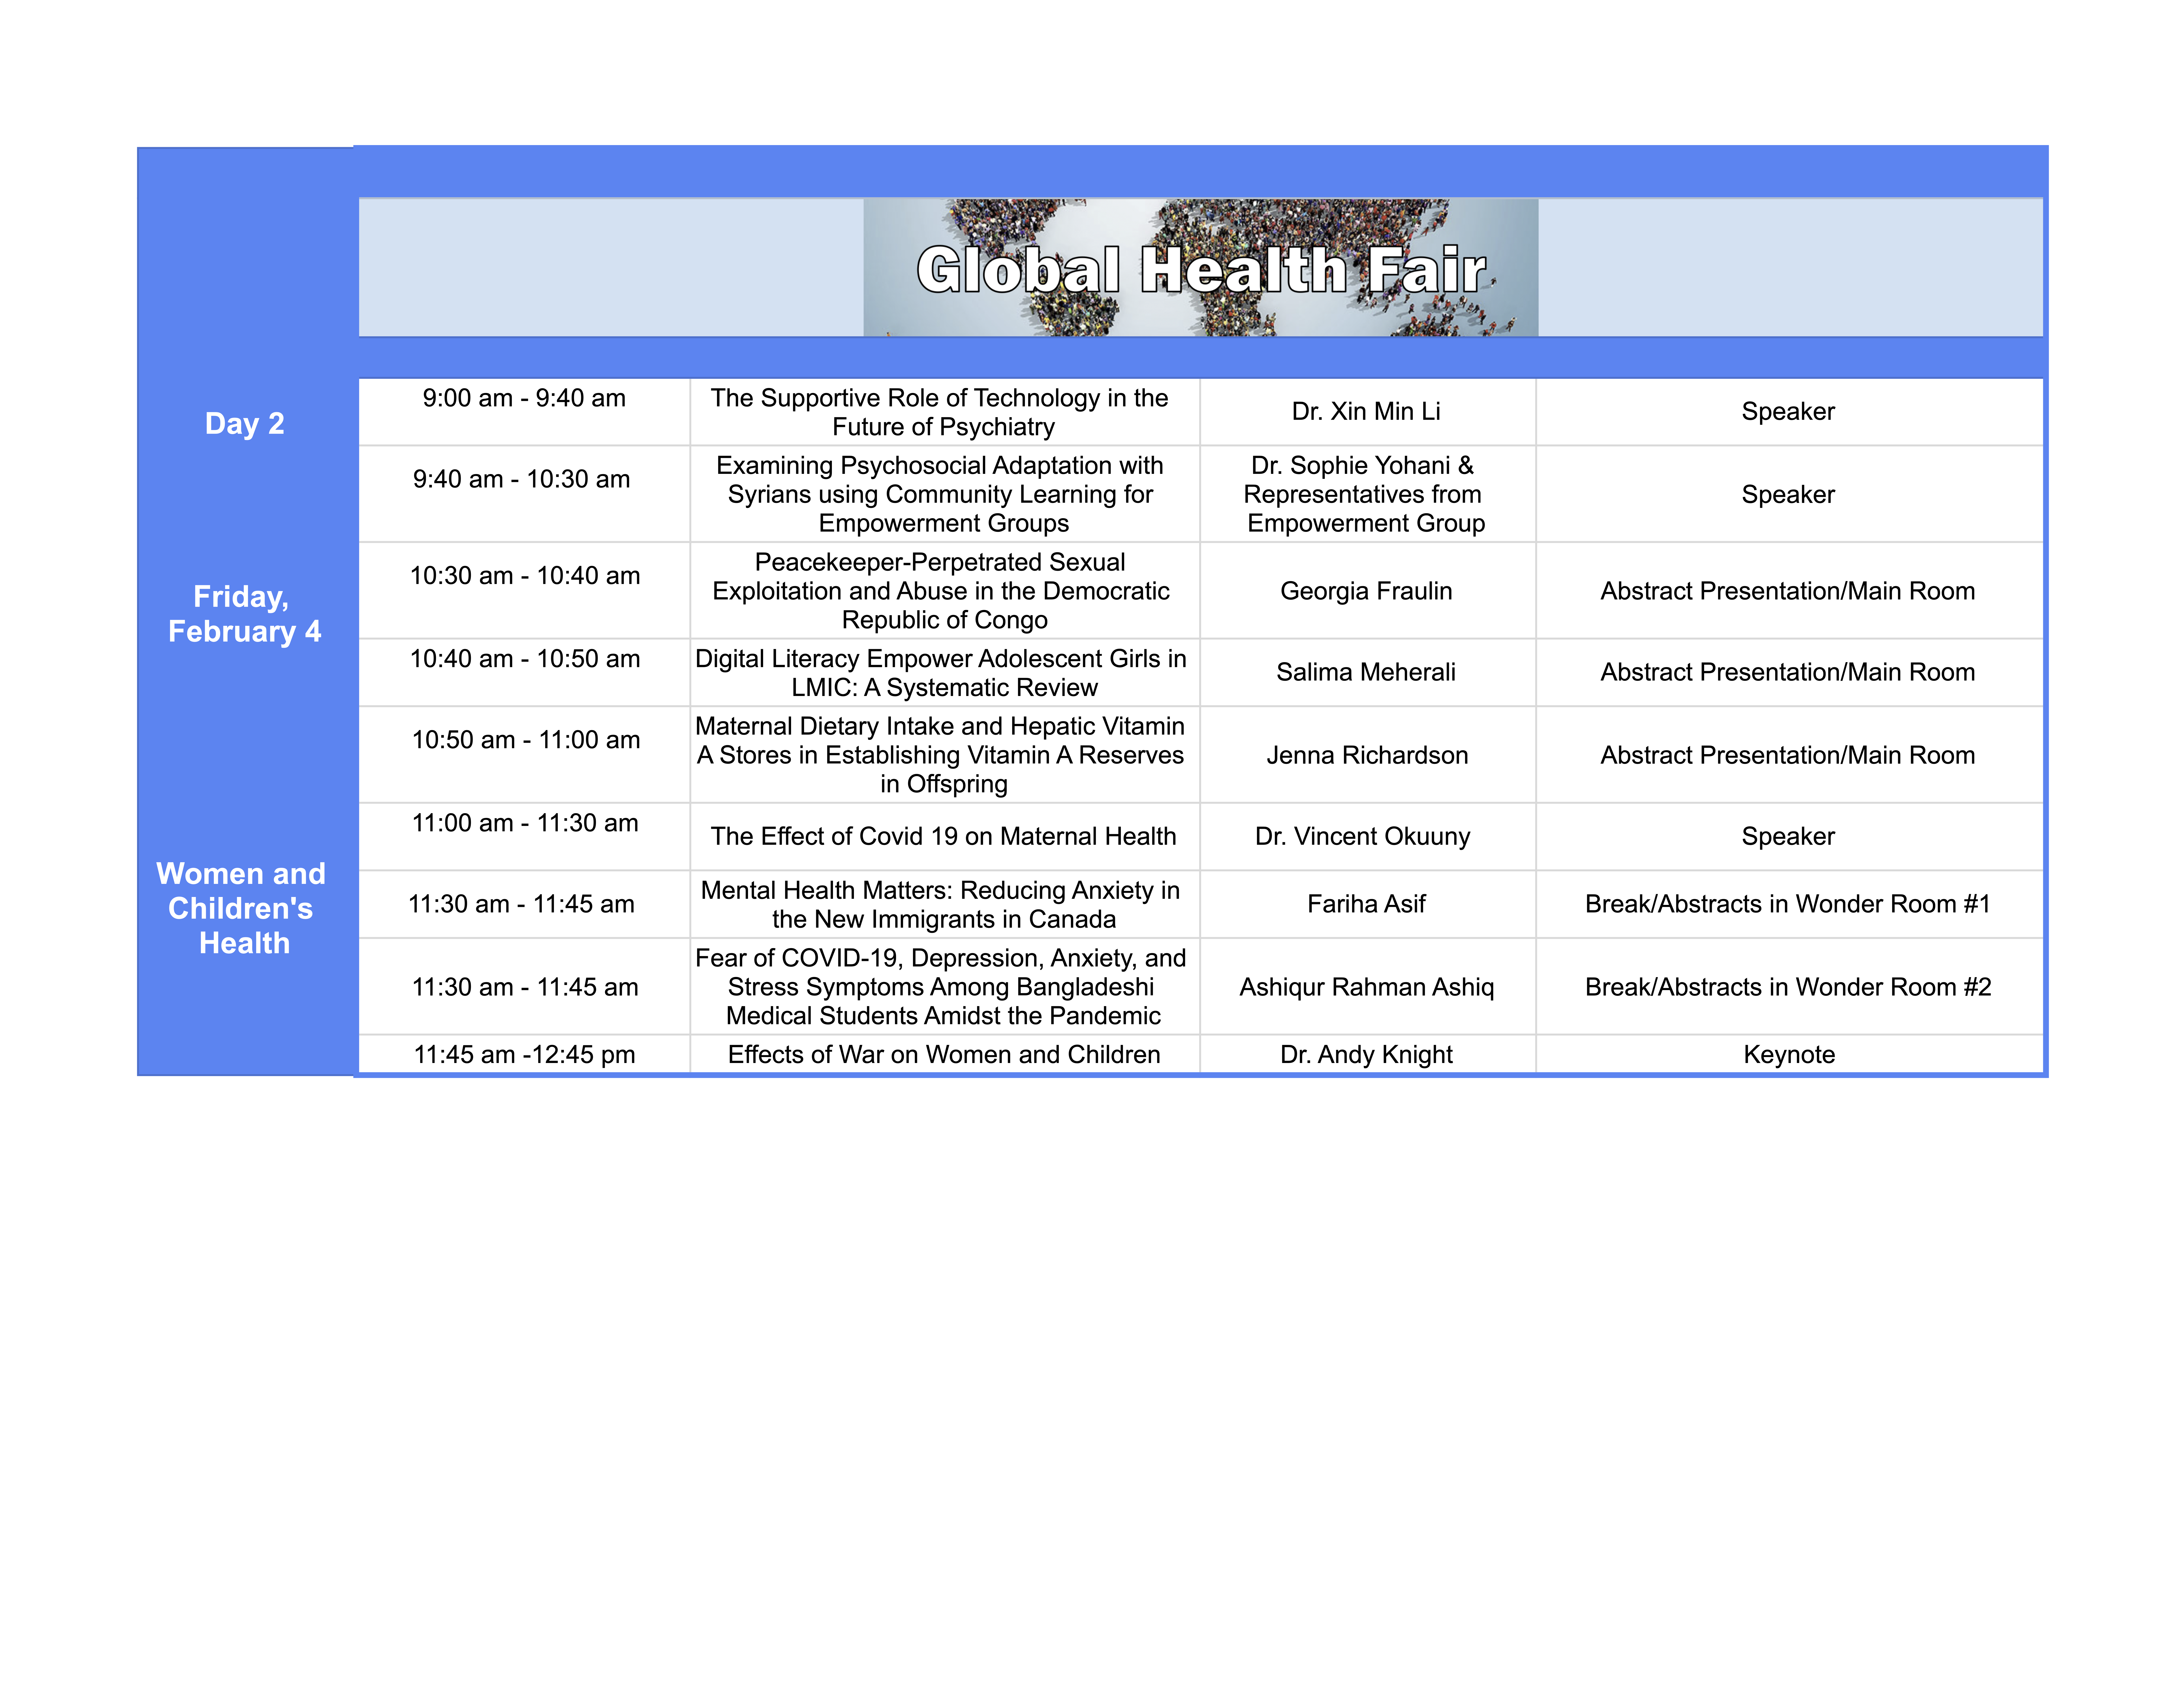 day-2-global-health-fair-2022-program-at-a-glance.png